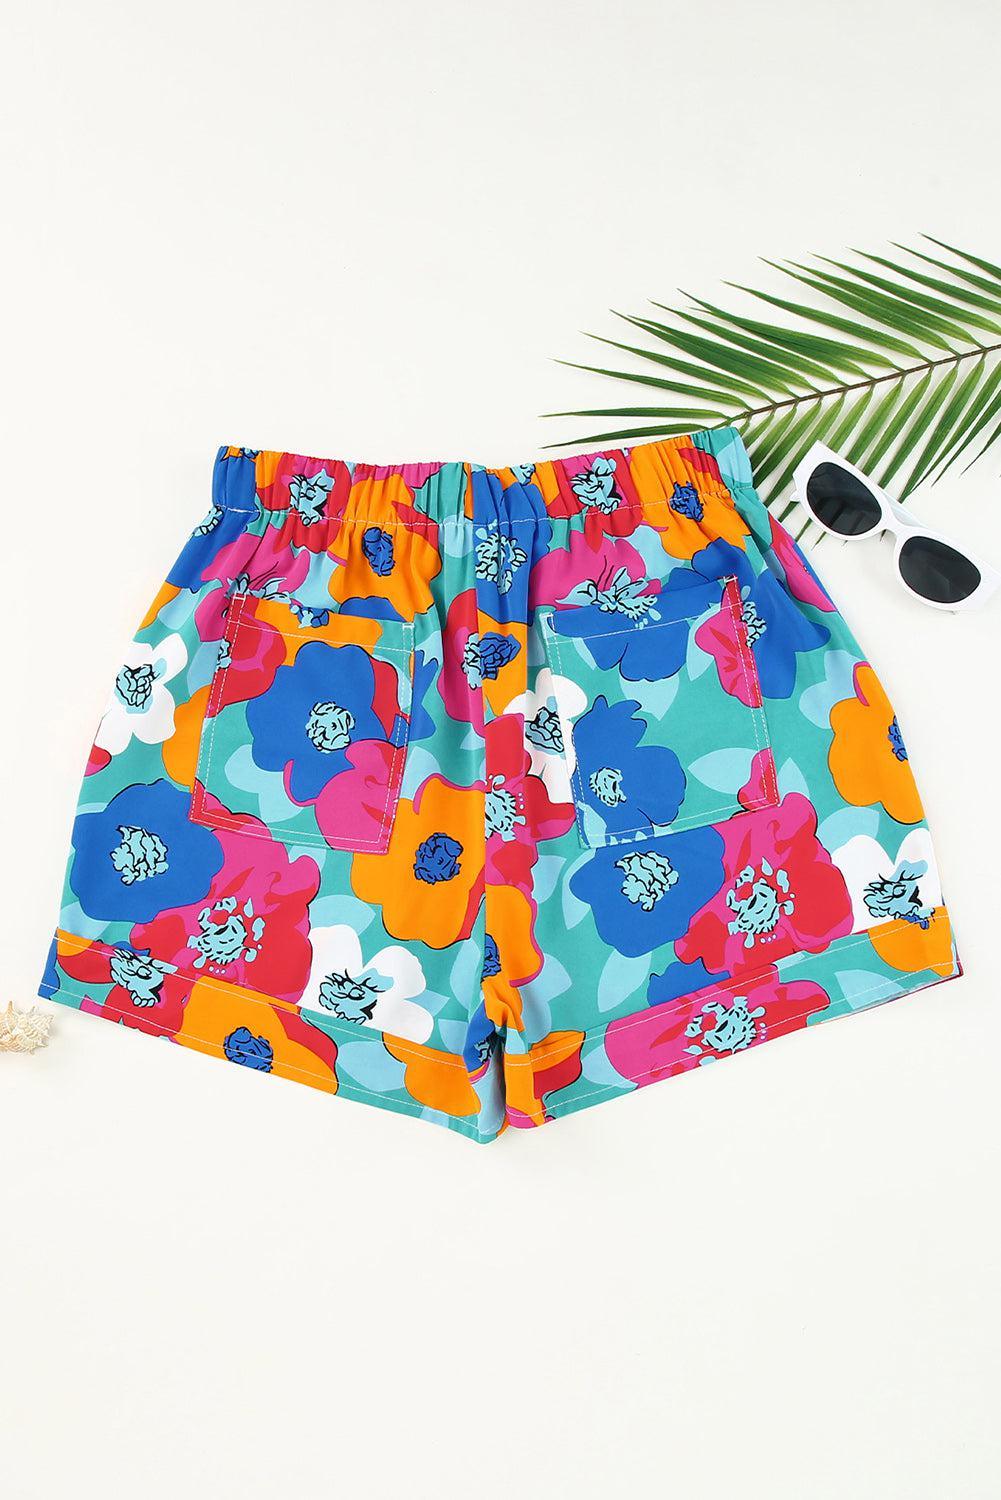 a pair of sunglasses and a pair of colorful shorts